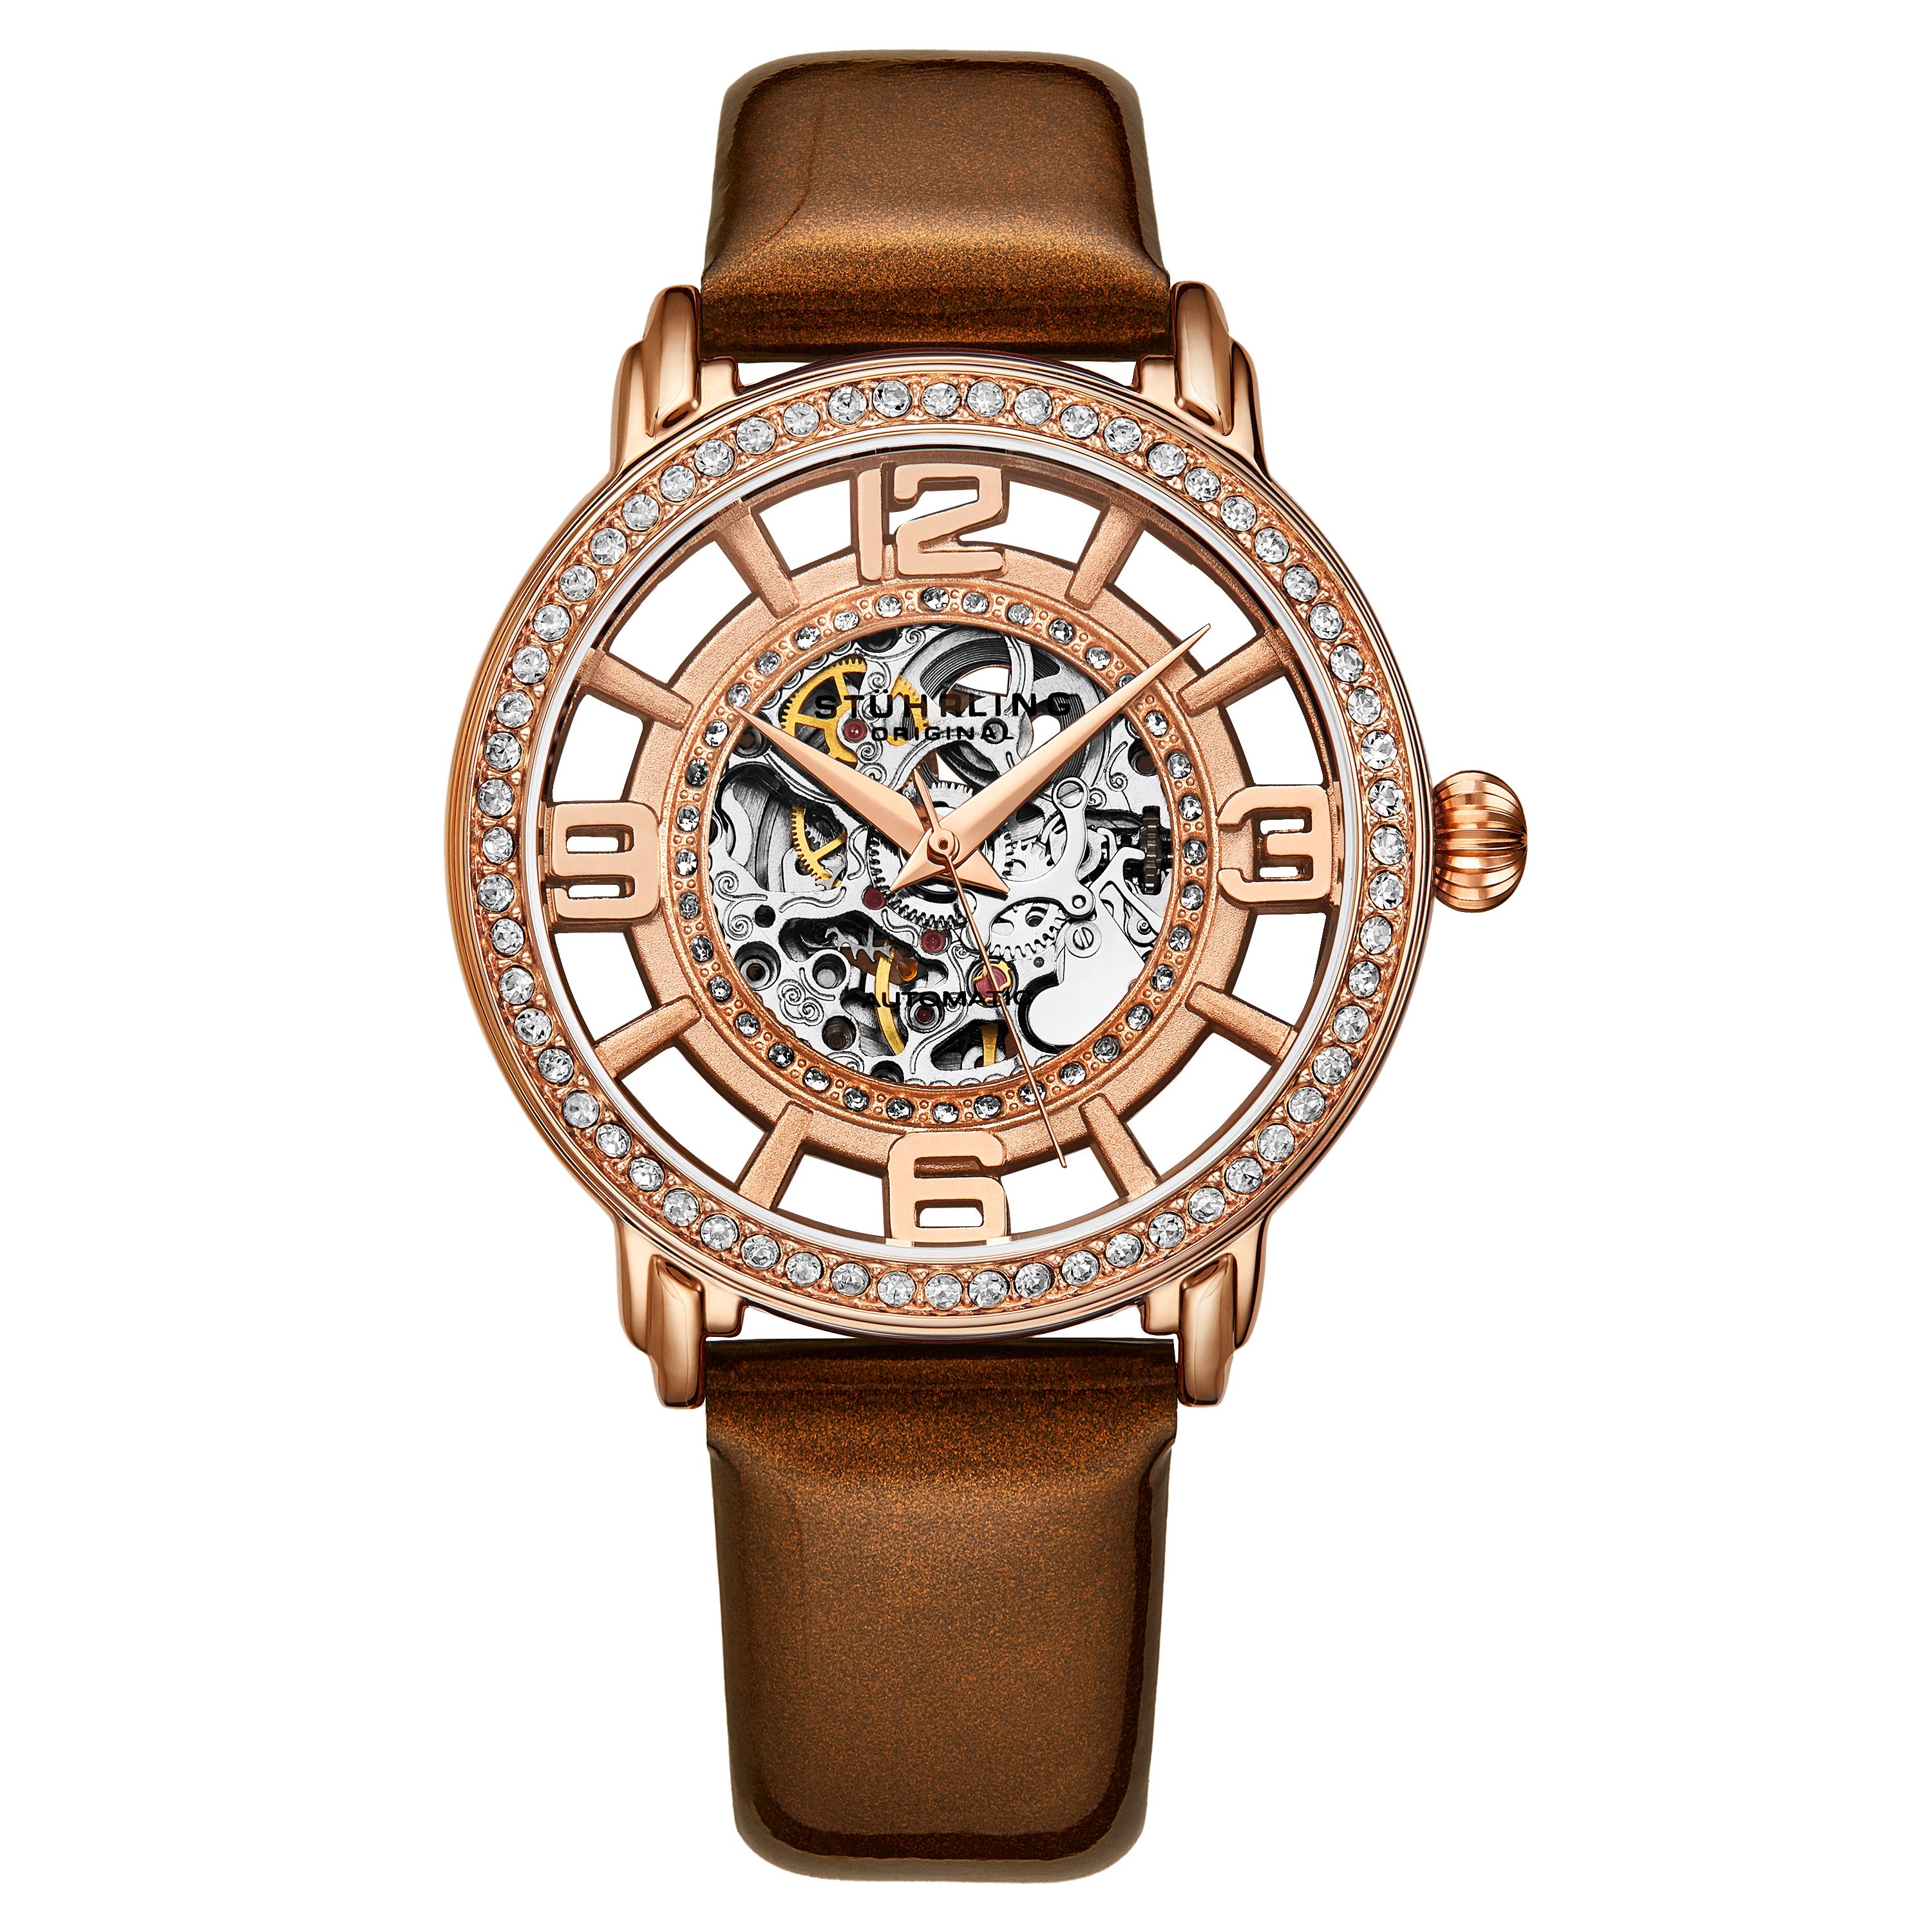 Women's Automatic Rose/Gold Toned Case, Rose/Gold Toned Bezel Studded With Rose/Gold Toned Colored Crystals, Rose/Gold Toned Skeletonized Dial With Gold Toned And Red Accents, Rose/Gold Toned Hands And Markers, Light Brown Patented Genuine Leather Strap Watch